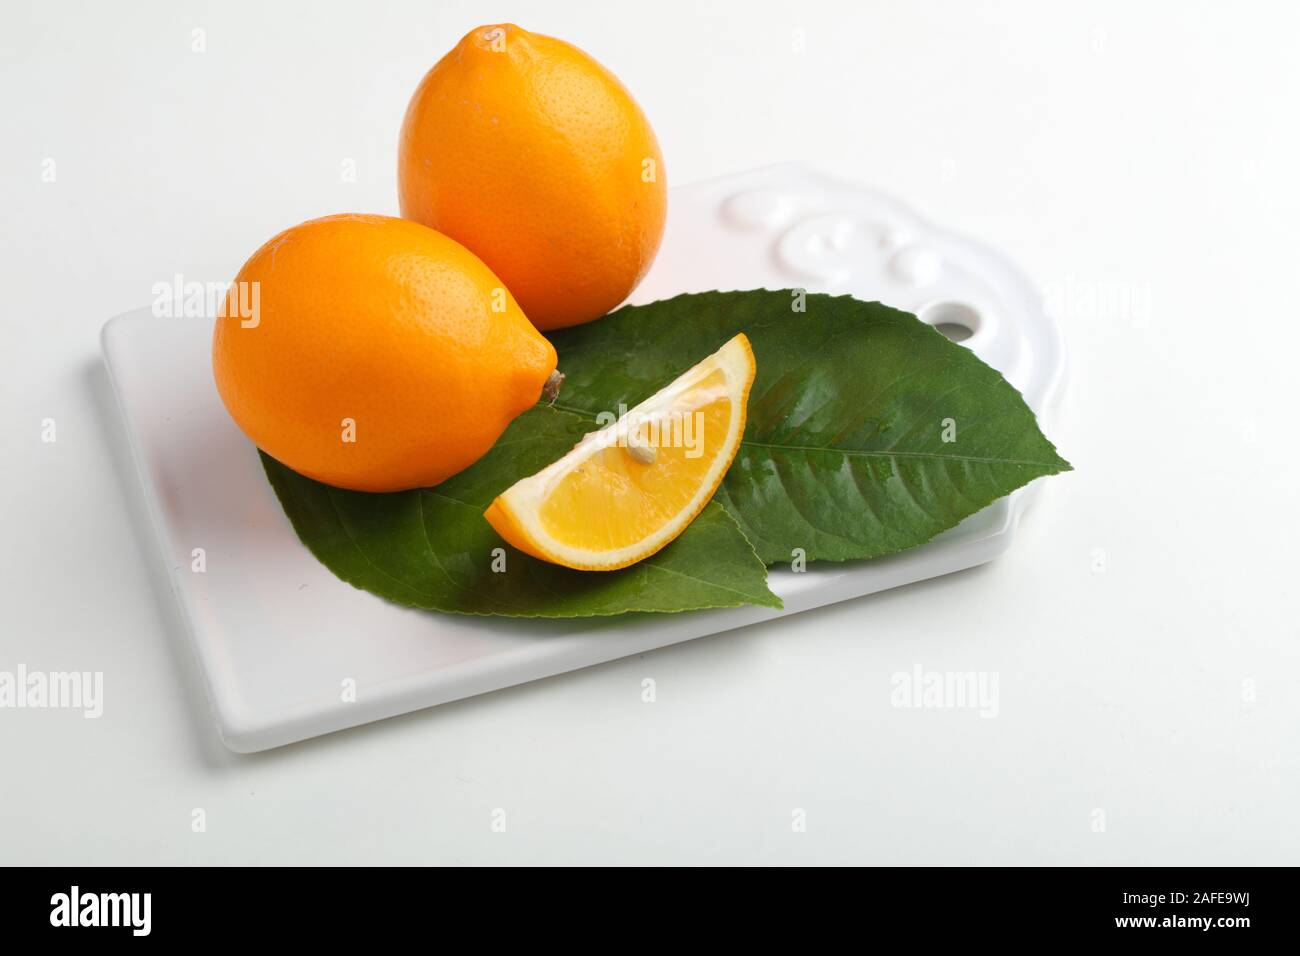 Orange colored lemon fruits with green leaves on a white cutting board Stock Photo